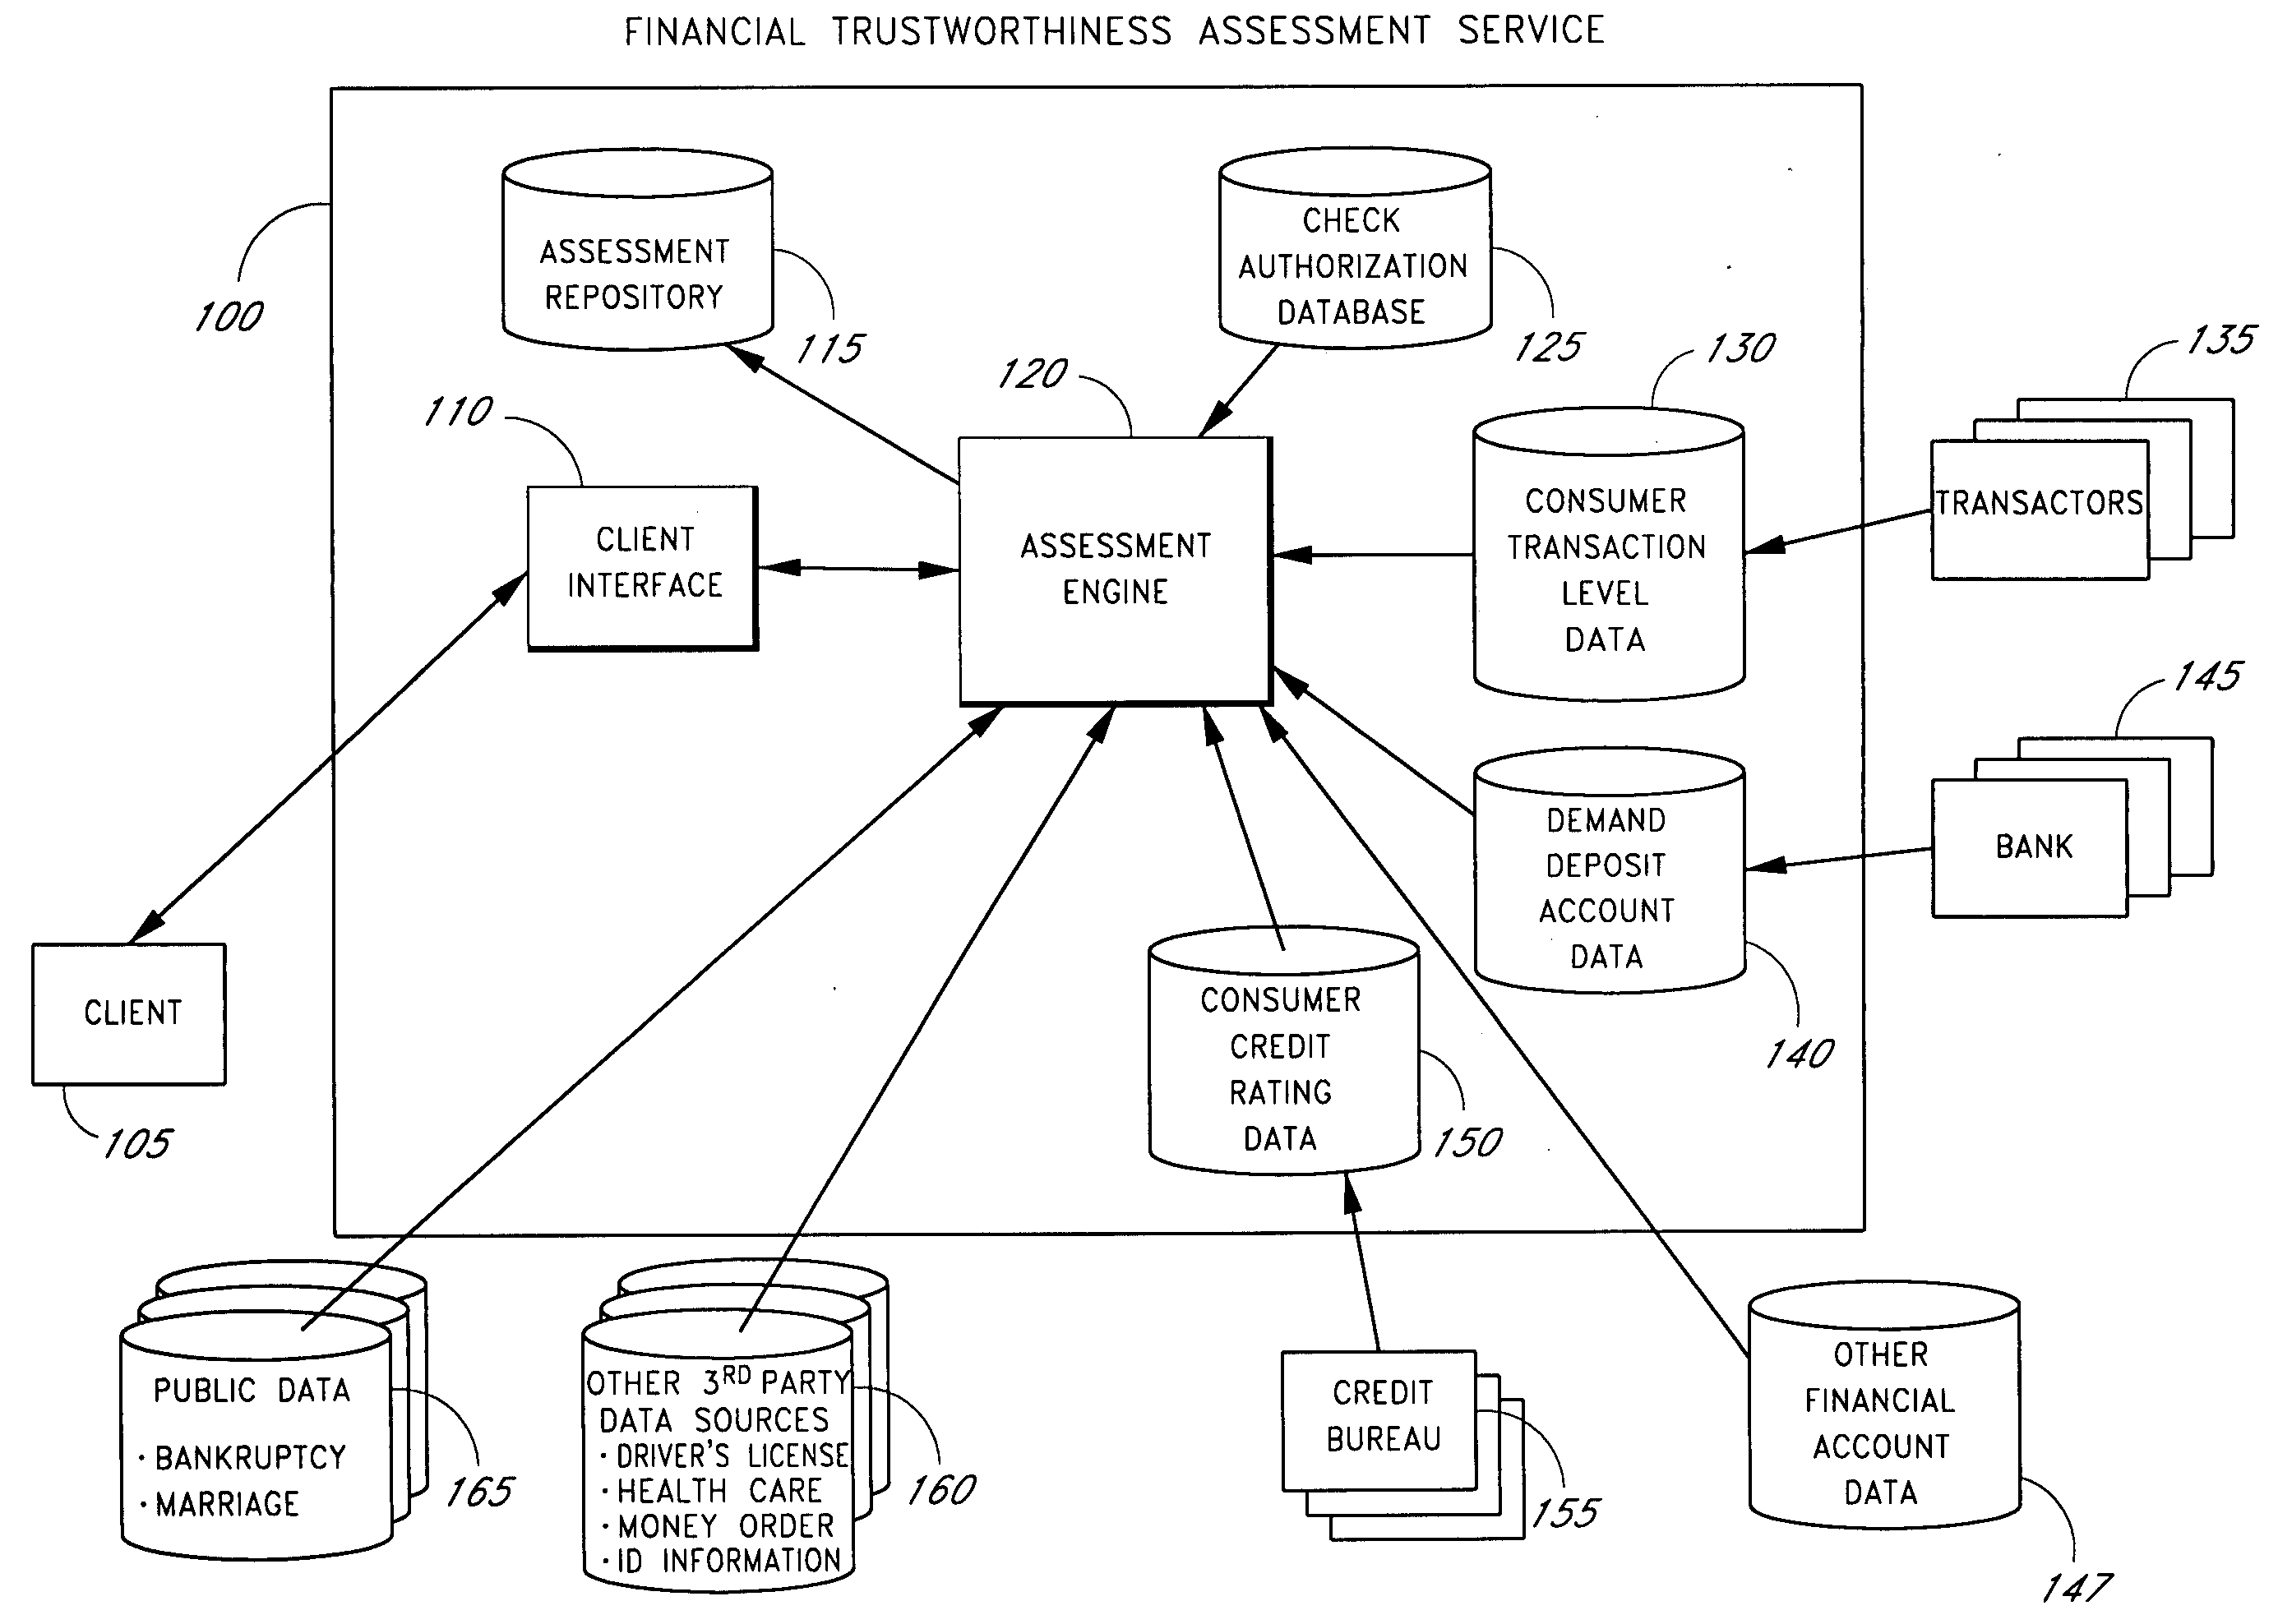 Systems and methods for performing a financial trustworthiness assessment